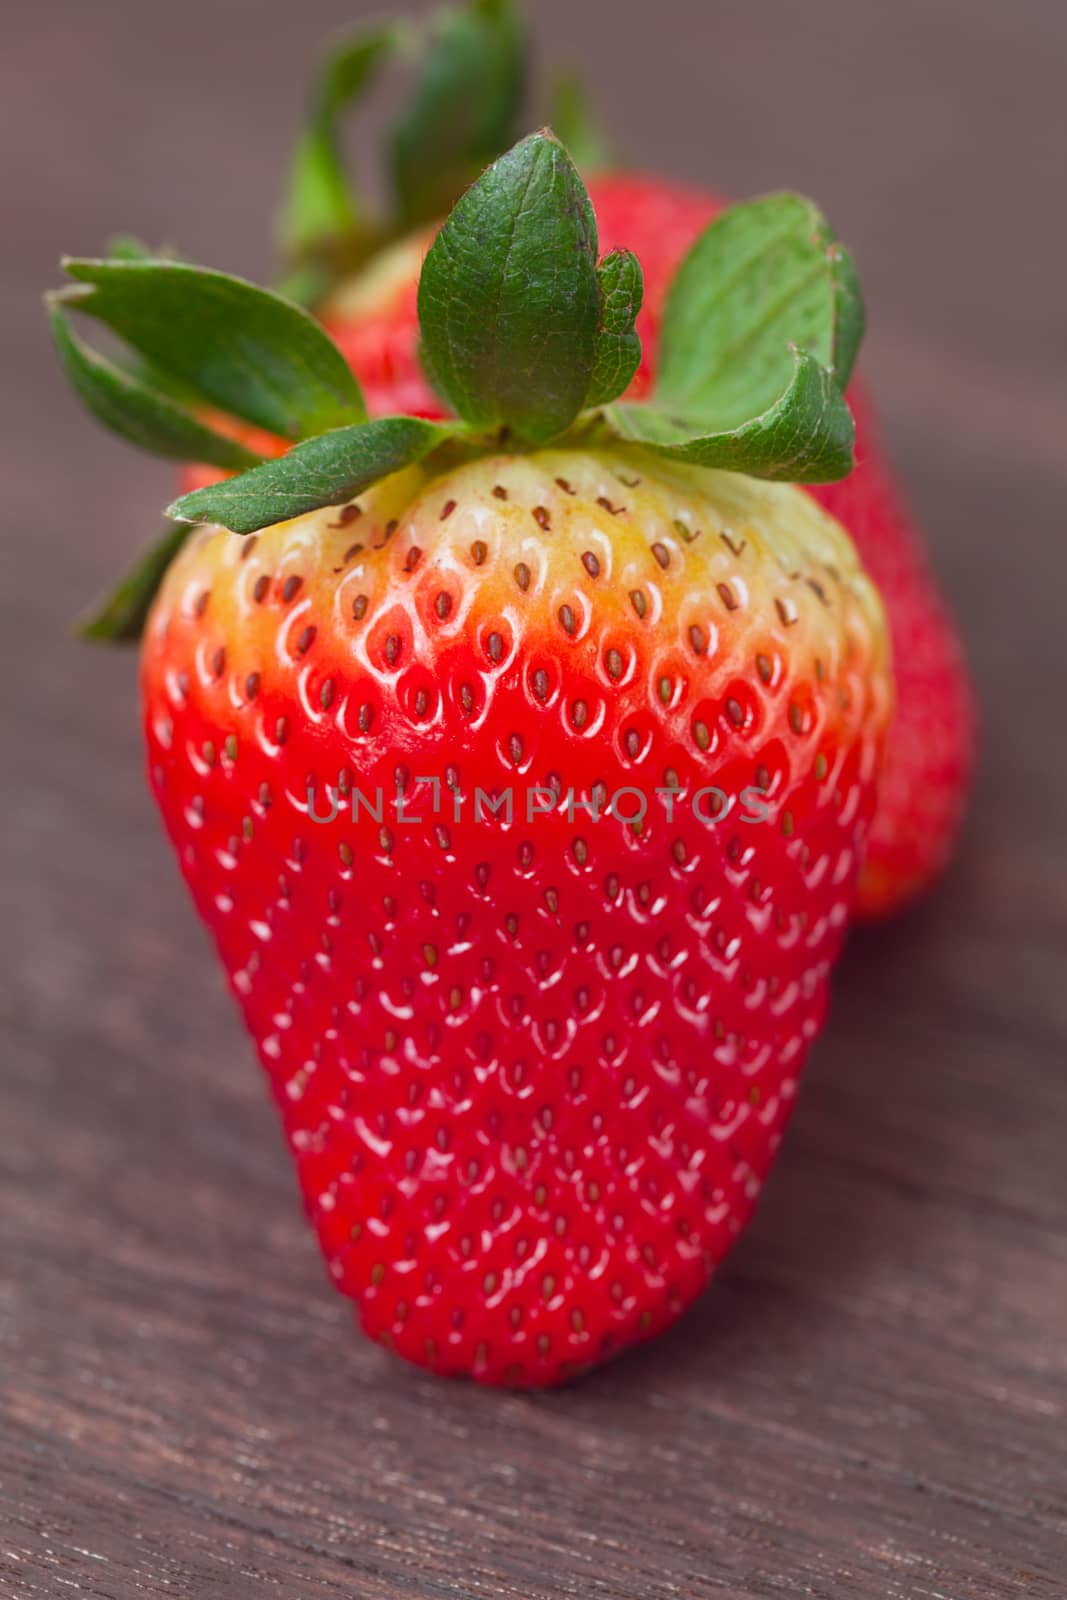 red juicy strawberry  on a wooden surface by jannyjus